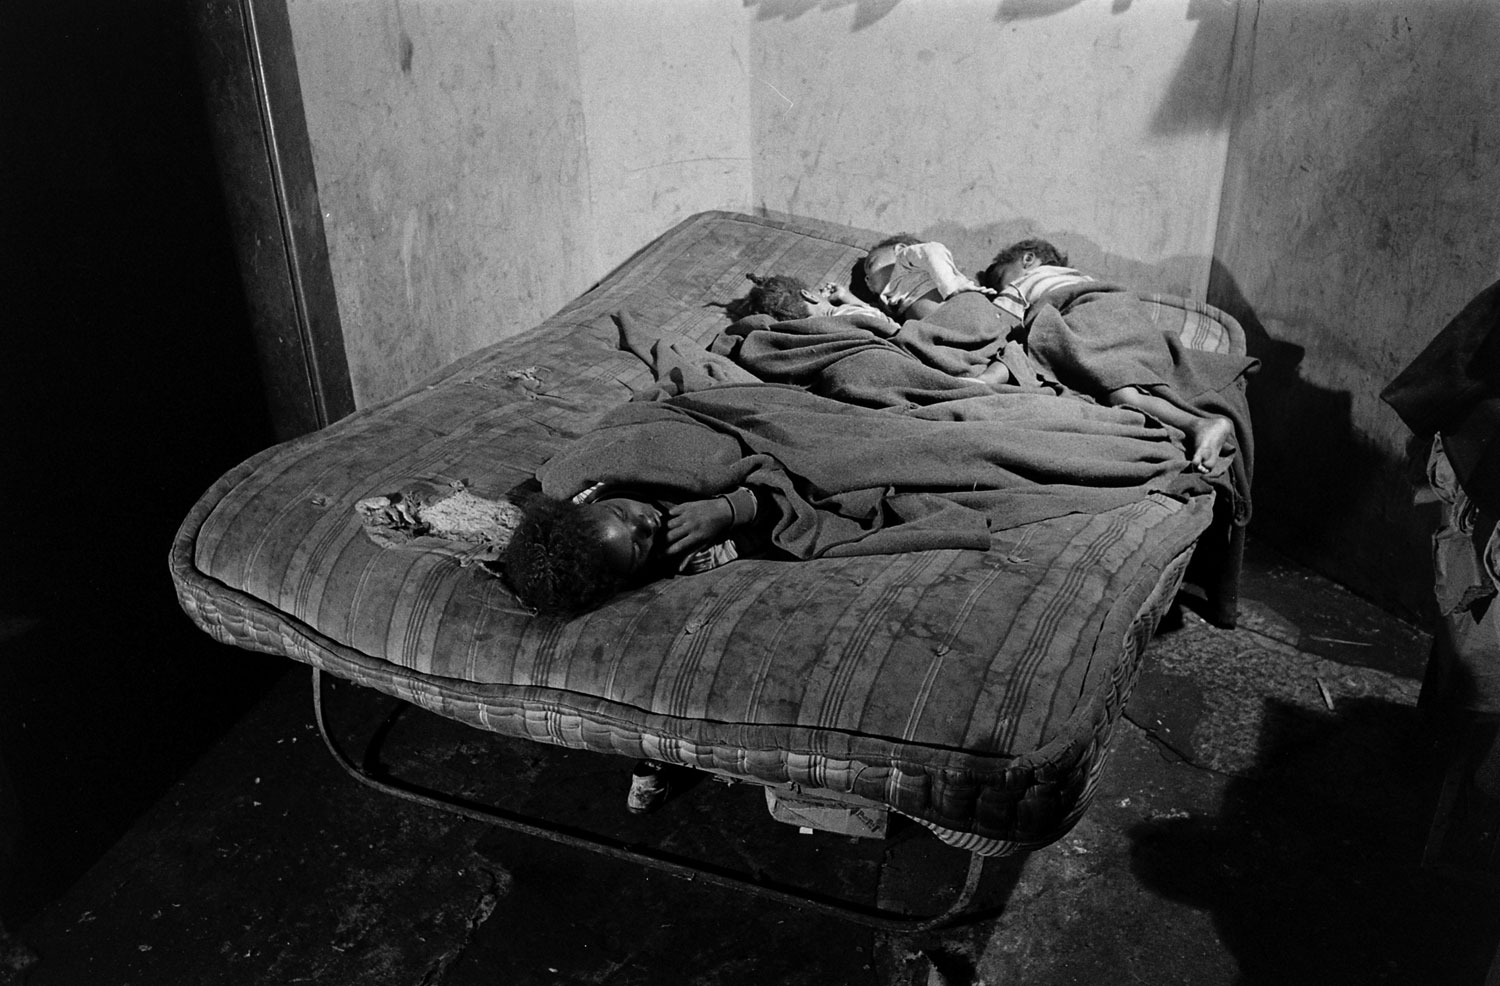 Family living situation in Chicago slums, 1954.